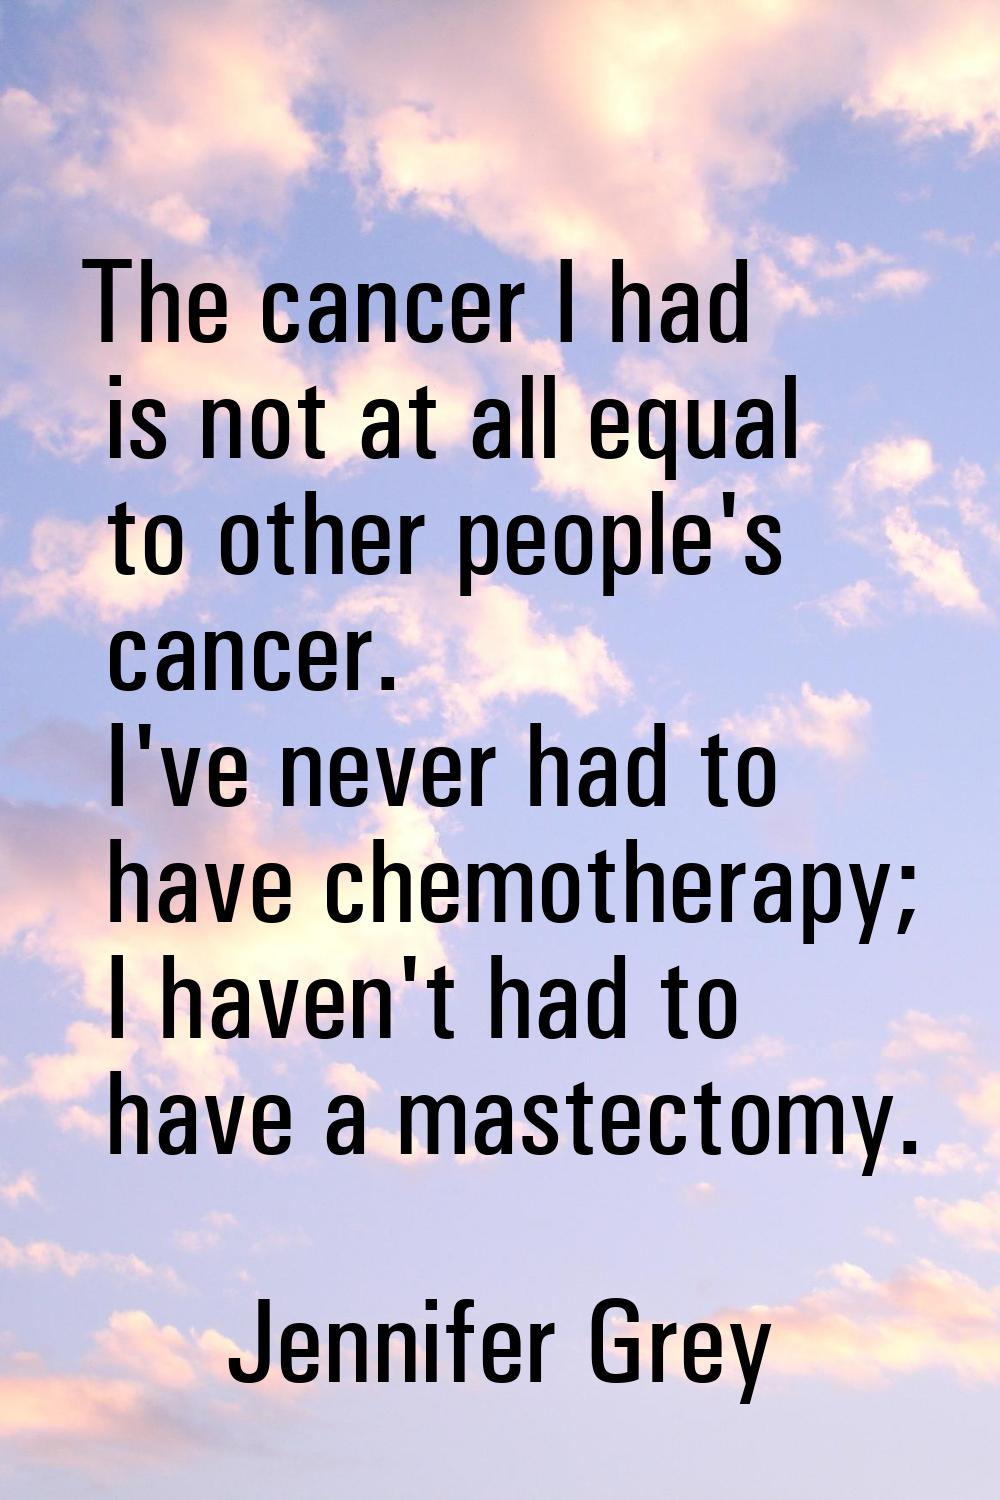 The cancer I had is not at all equal to other people's cancer. I've never had to have chemotherapy;